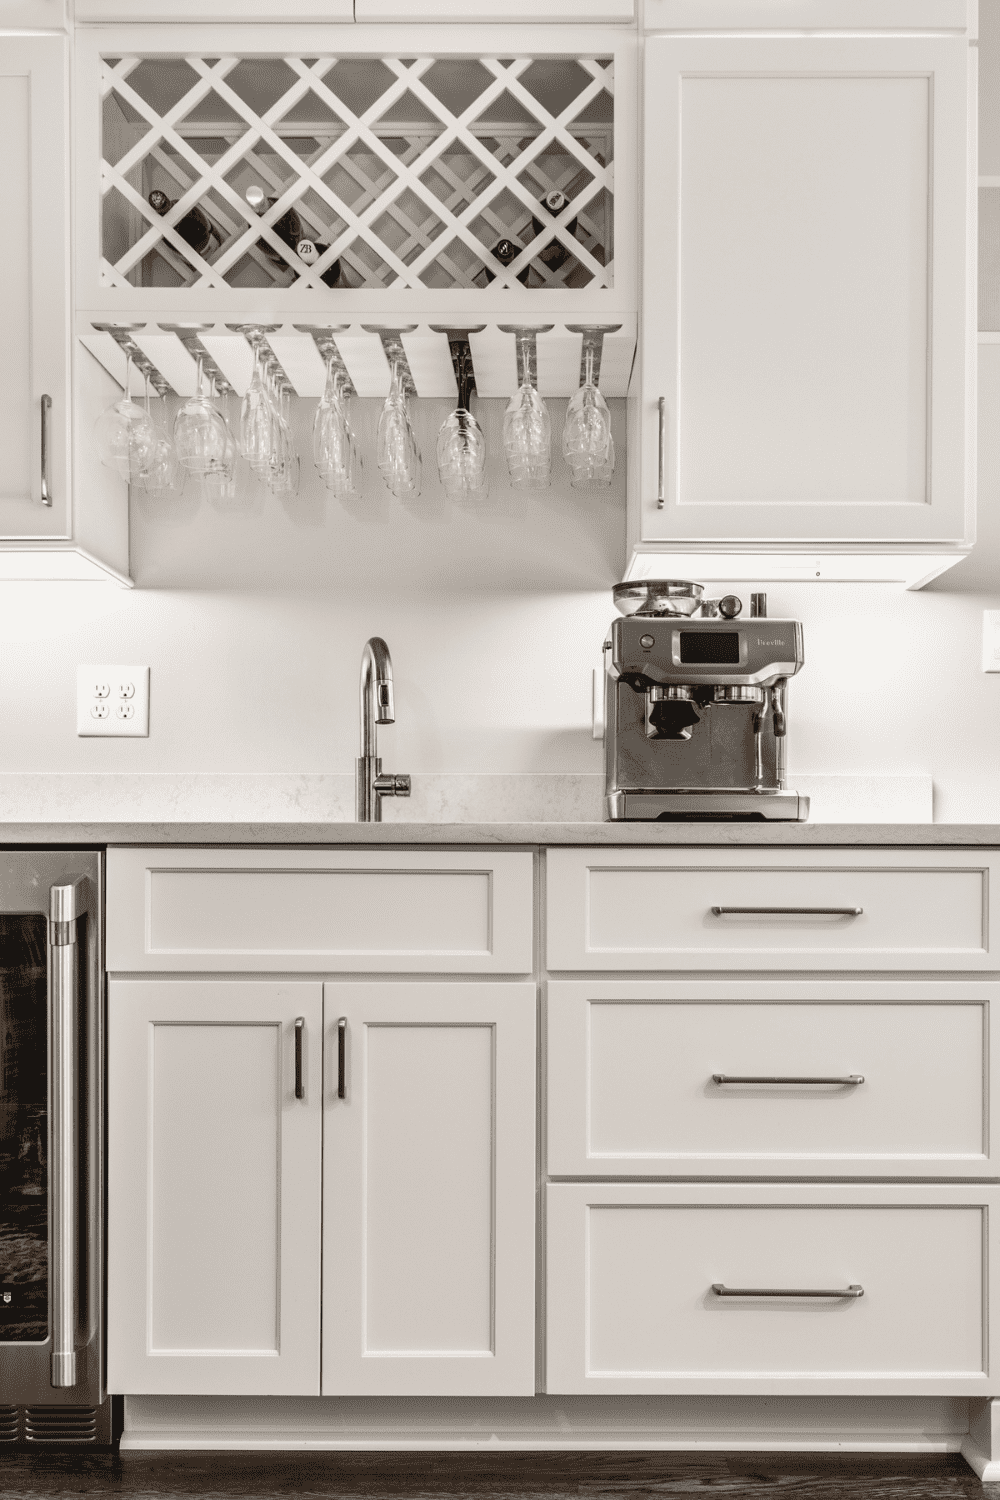 Nicholas Design Build | A kitchen with white cabinets and a wine rack.